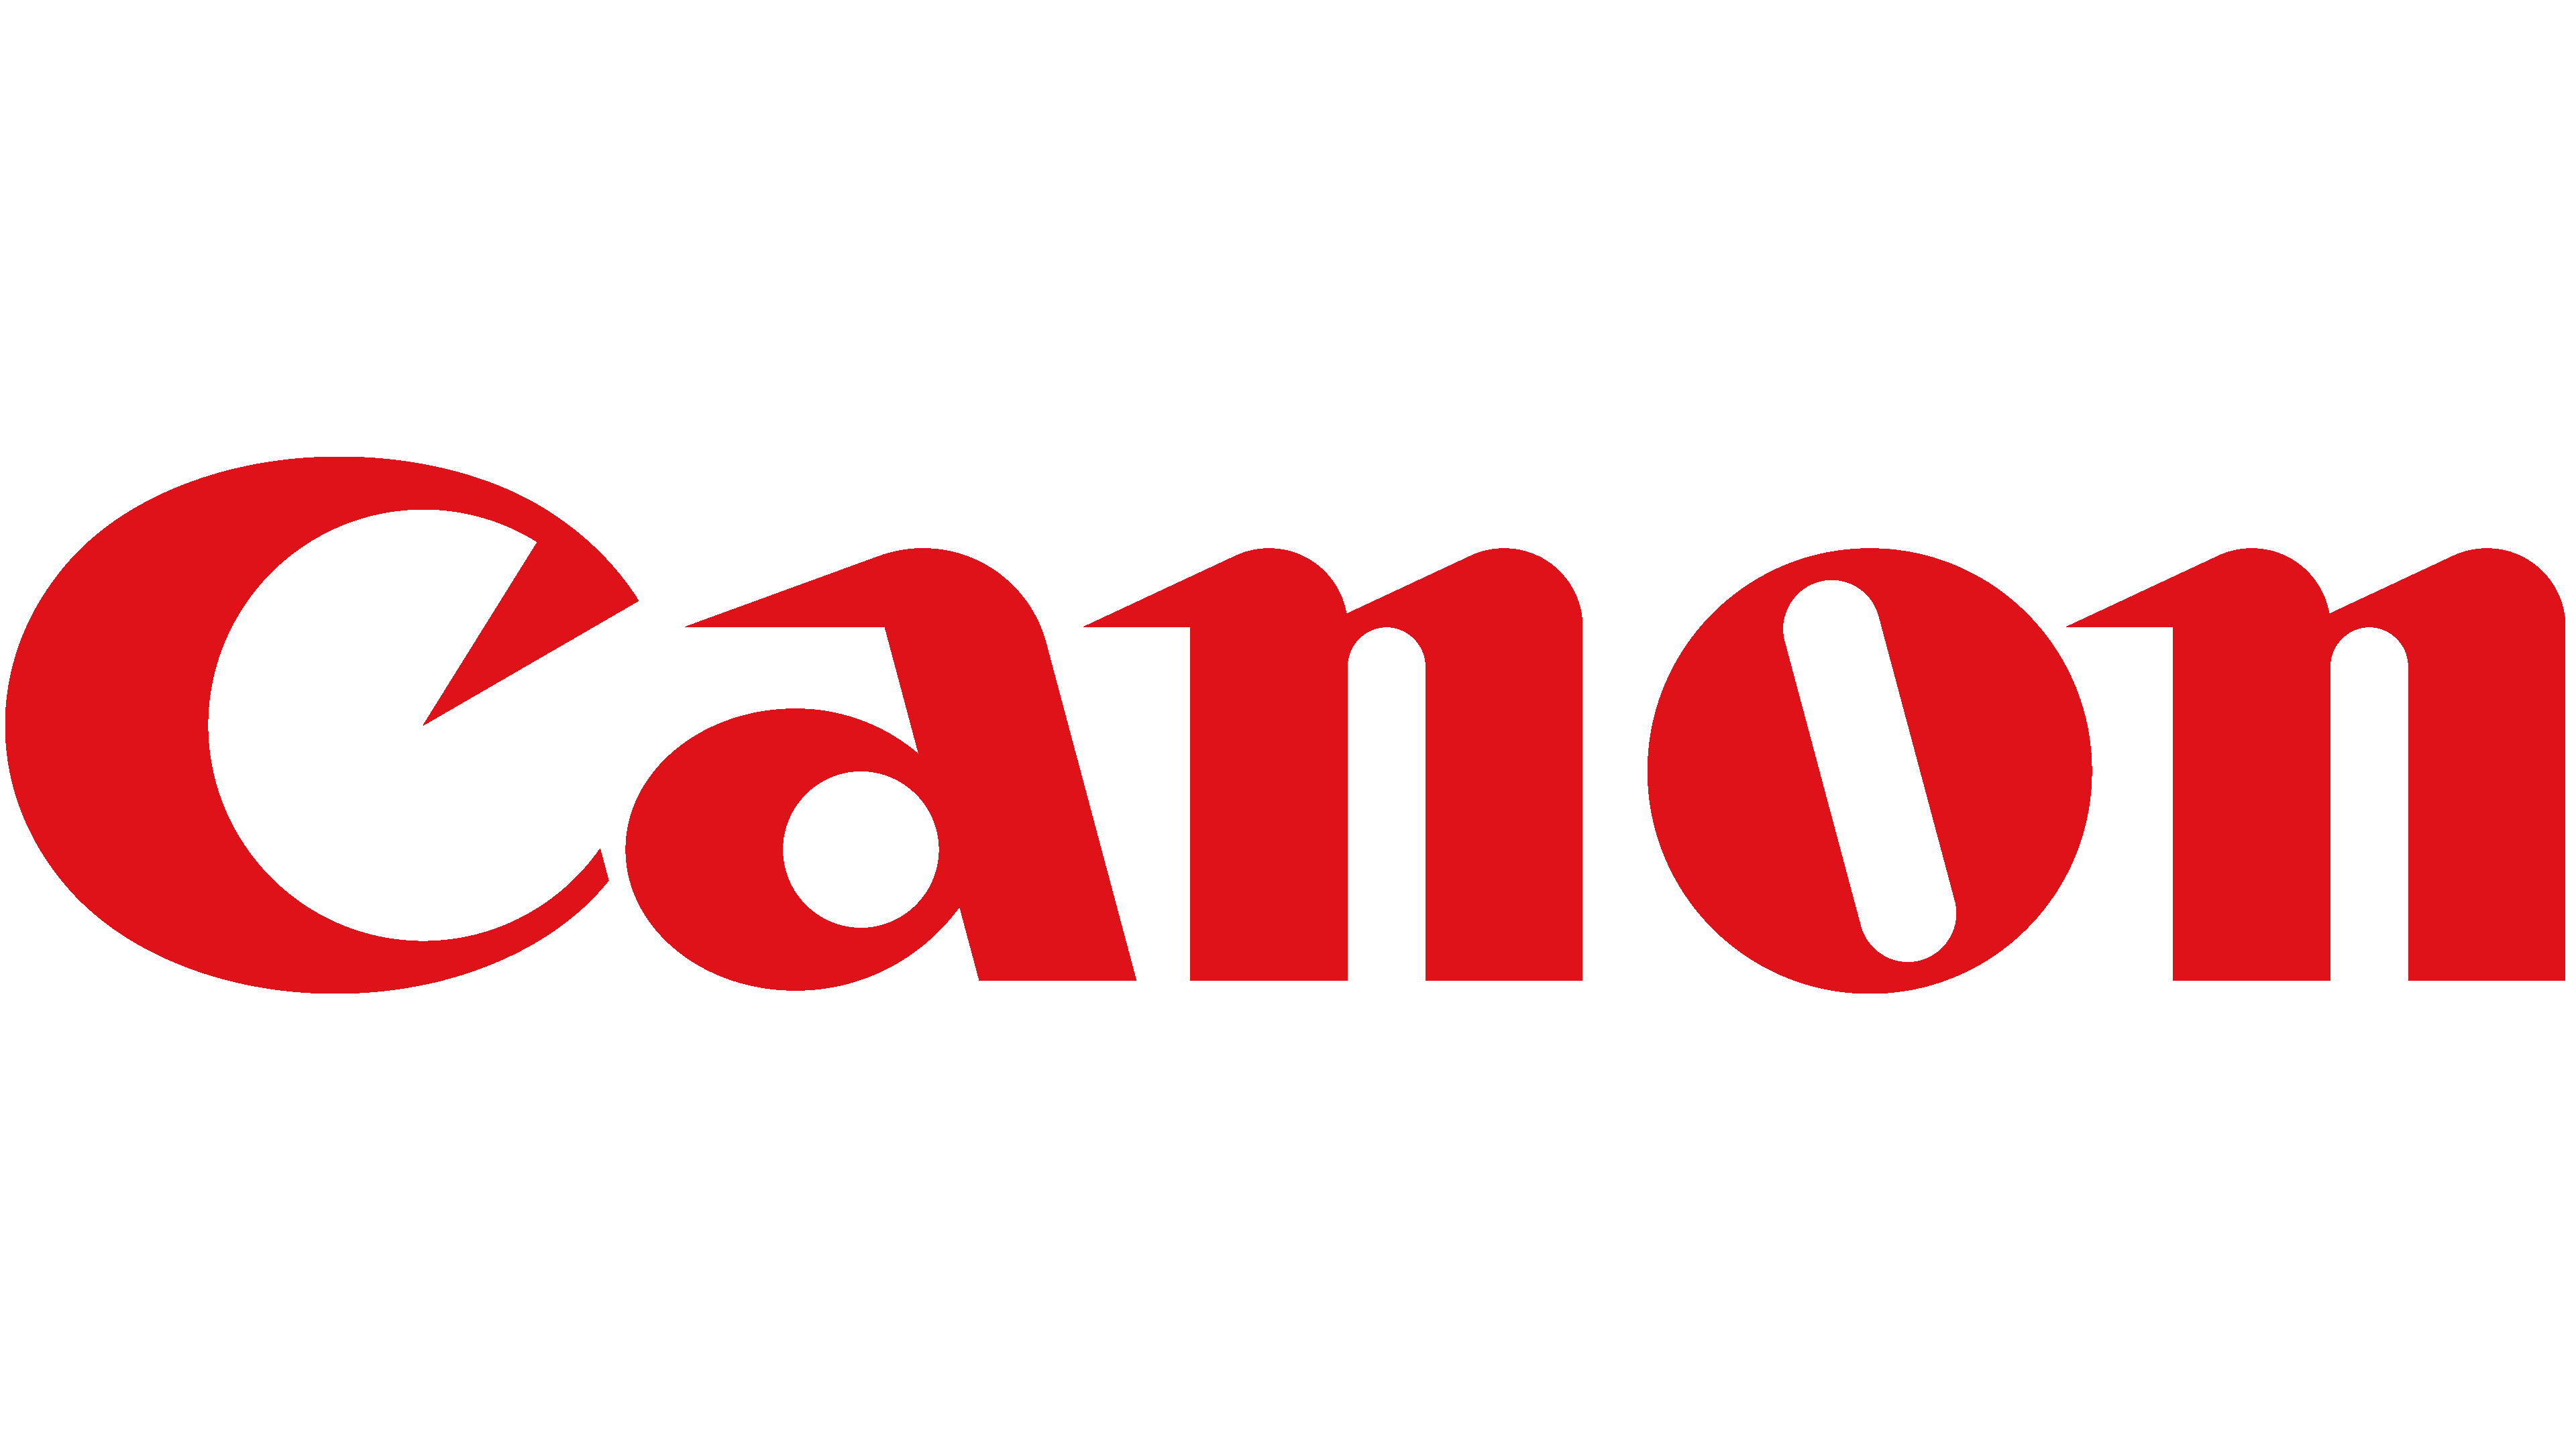 Canon-Logo.png